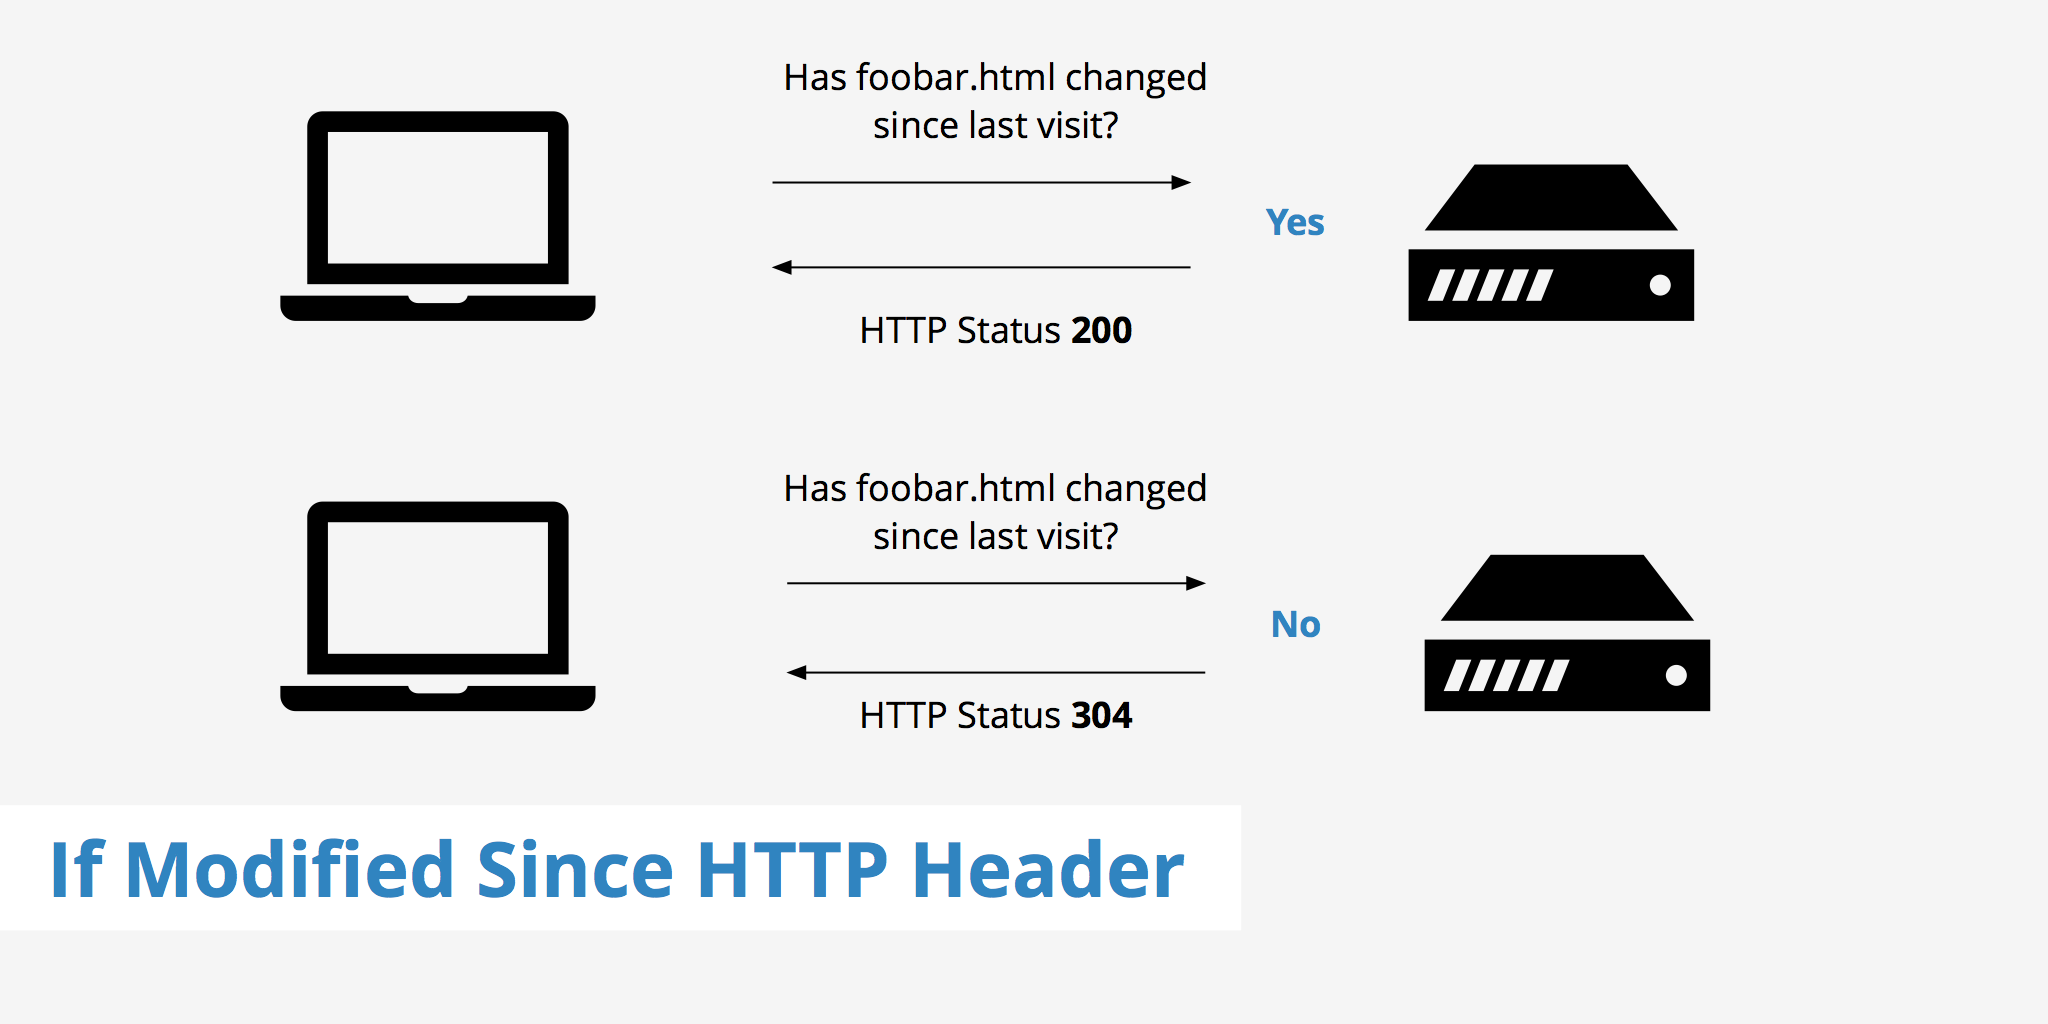 If-Modified-Since HTTP Header